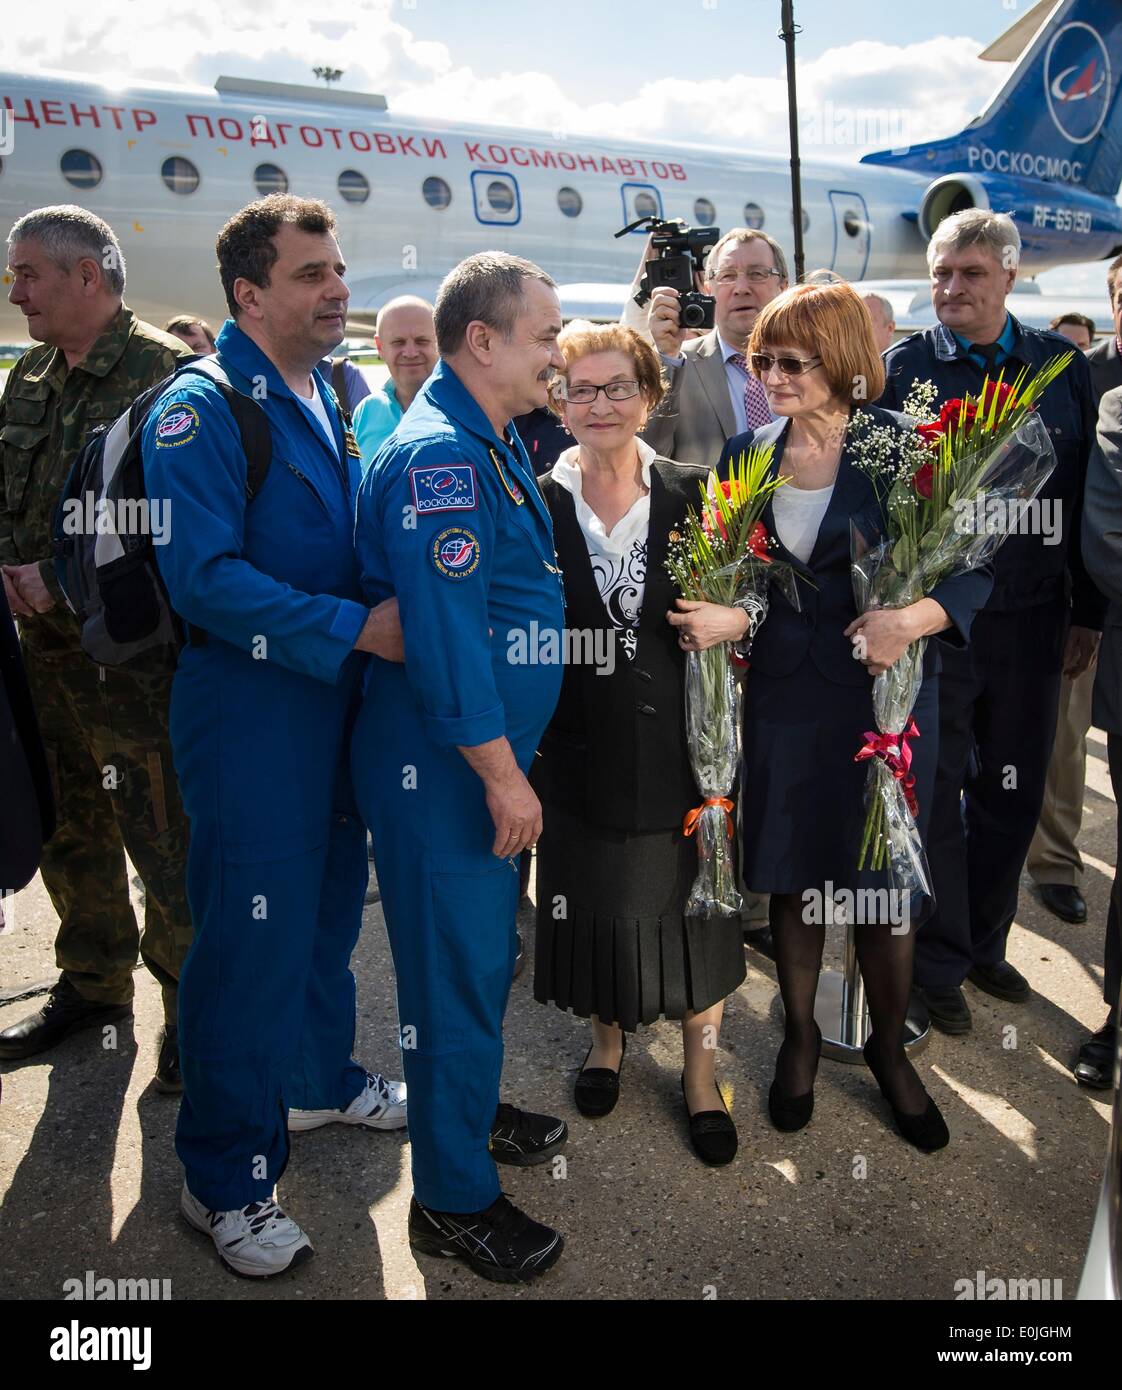 ISS Expedition 39 Flight Engineer Mikhail Tyurin of the Russian Federal Space Agency is welcomed home upon his return at Chkalovsky Airport a few hours after landing in the Soyuz TMA-11M spacecraft in Kazakhstan May 14, 2014 in Moscow, Russia. Wakata, Tyurin and Mastracchio returned to Earth after more than six months onboard the International Space Station where they served as members of the Expedition 38 and 39 crew. Stock Photo